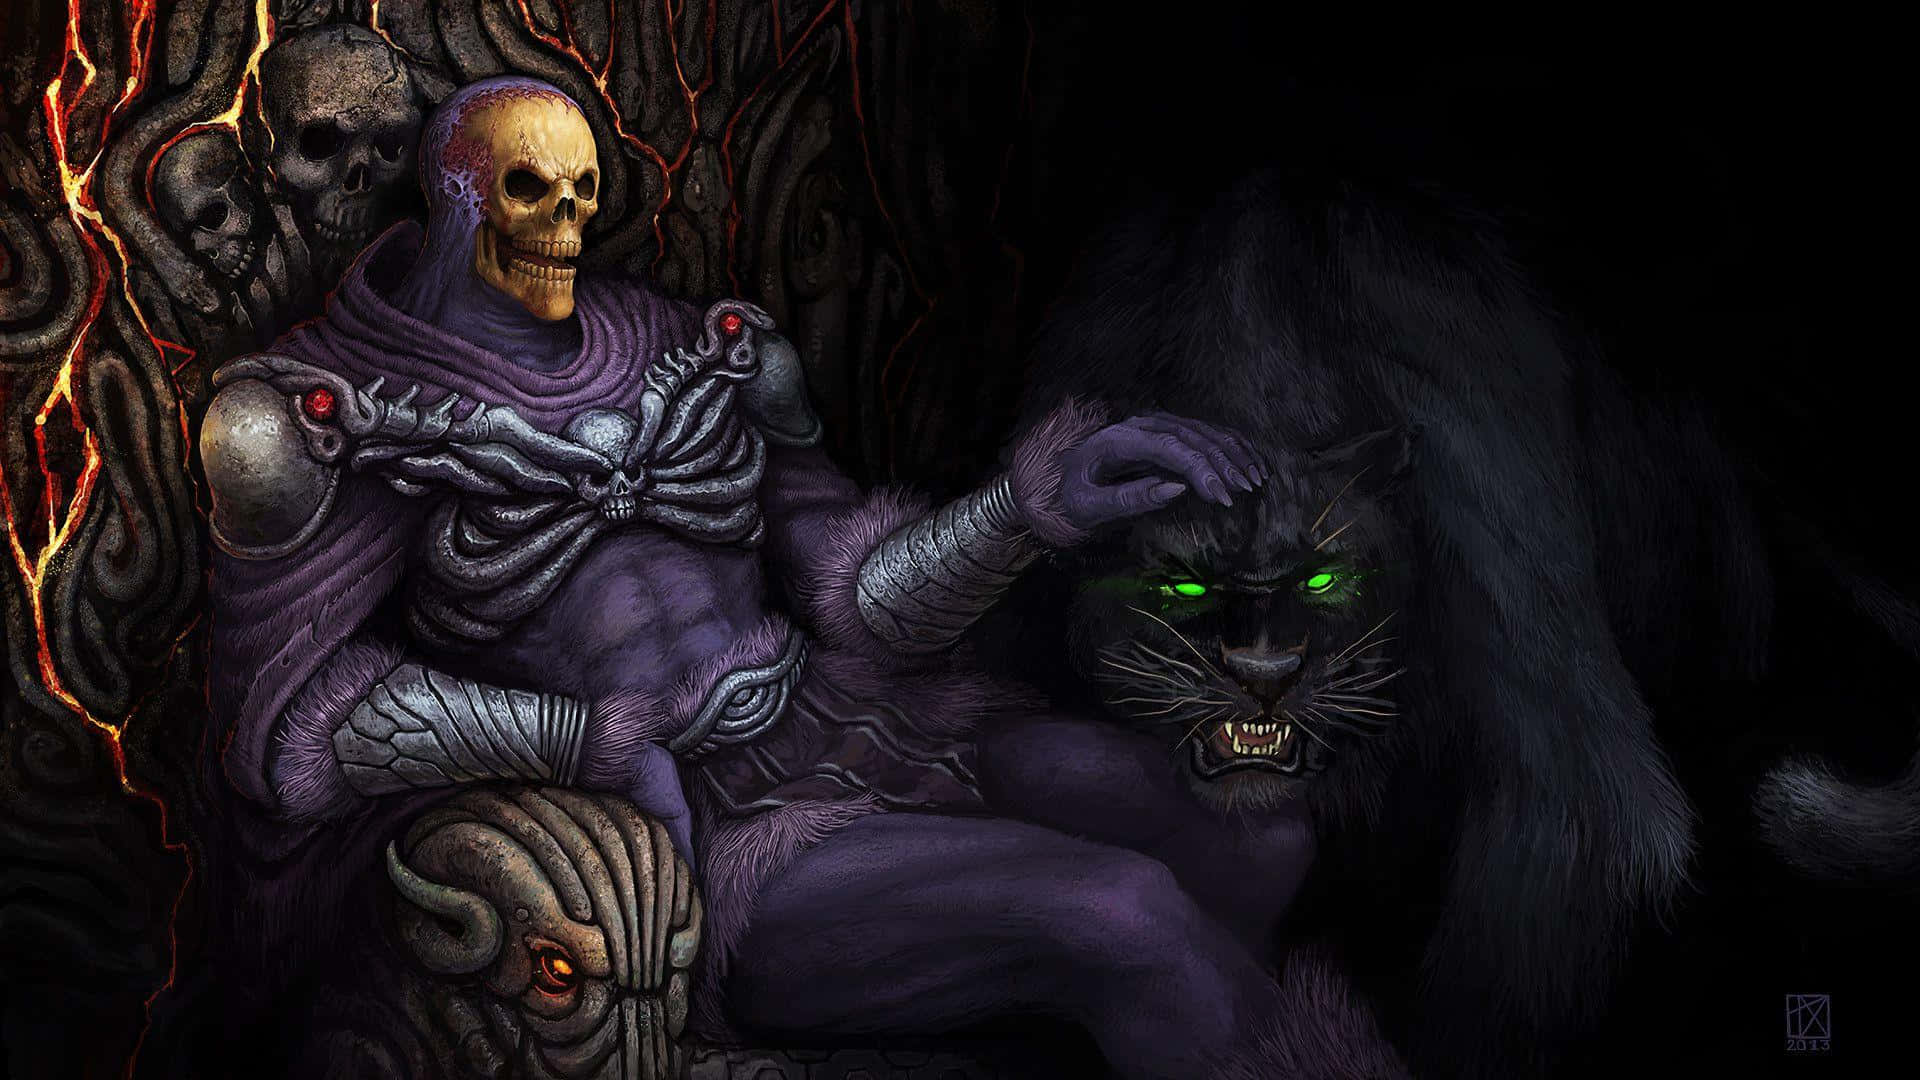 A Skeleton Sitting On A Purple Chair With A Black Cat